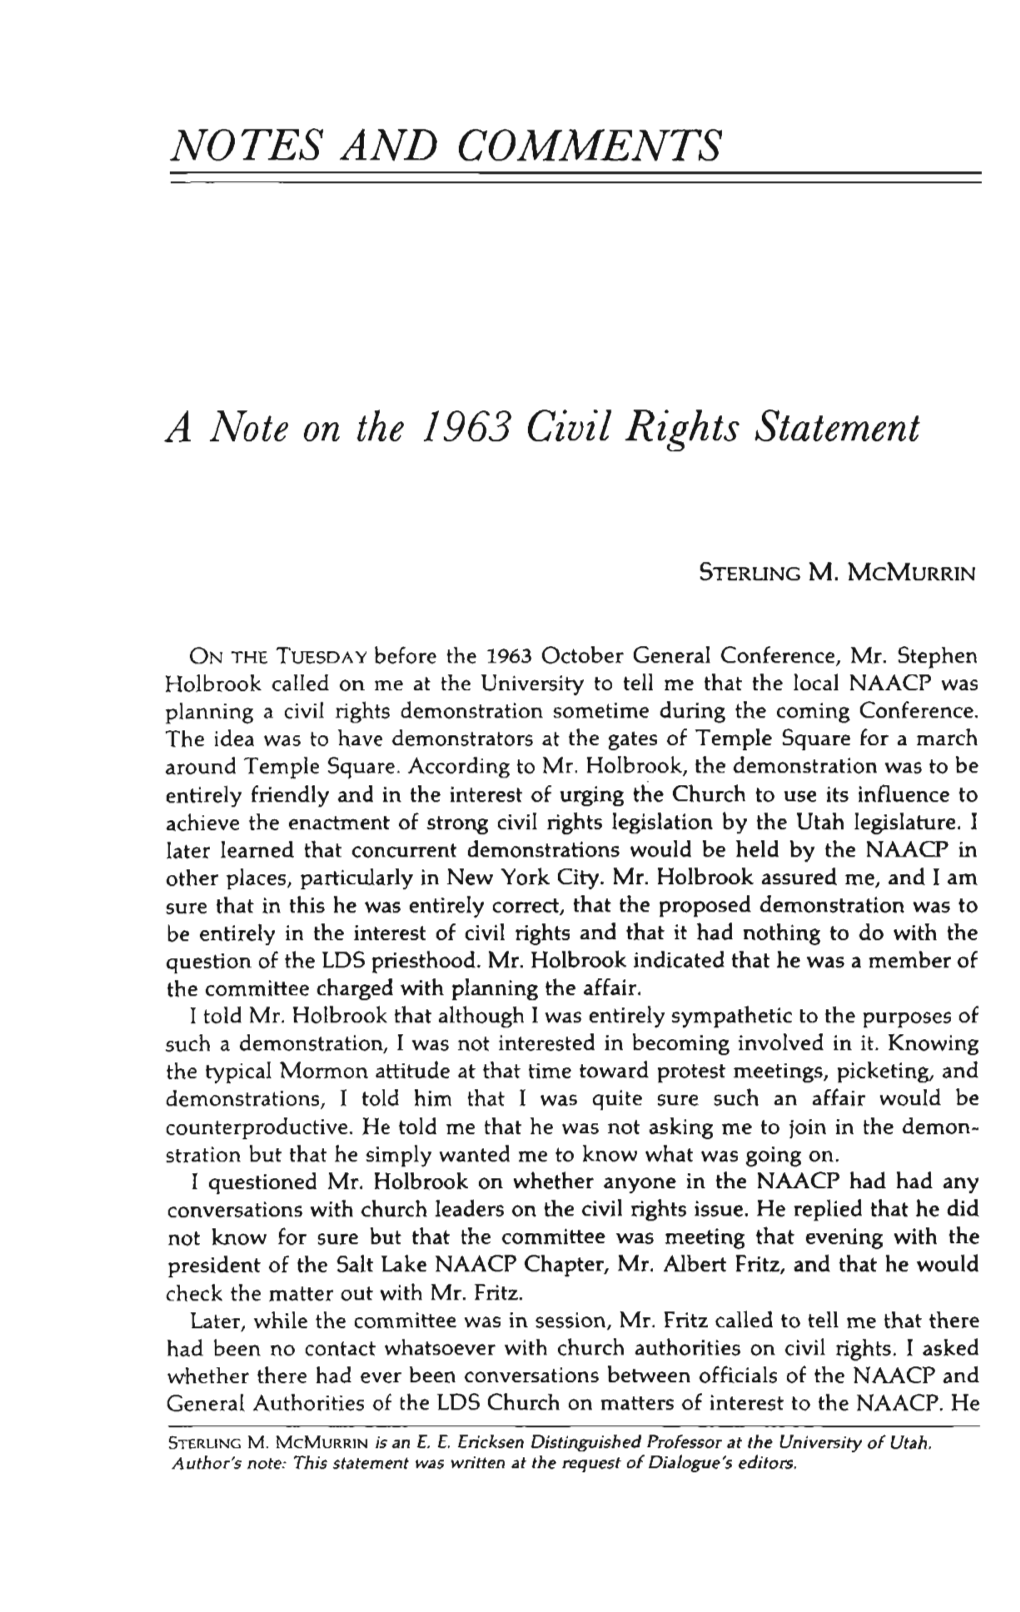 NOTES and COMMENTS a Note on the 1963 Civil Rights Statement